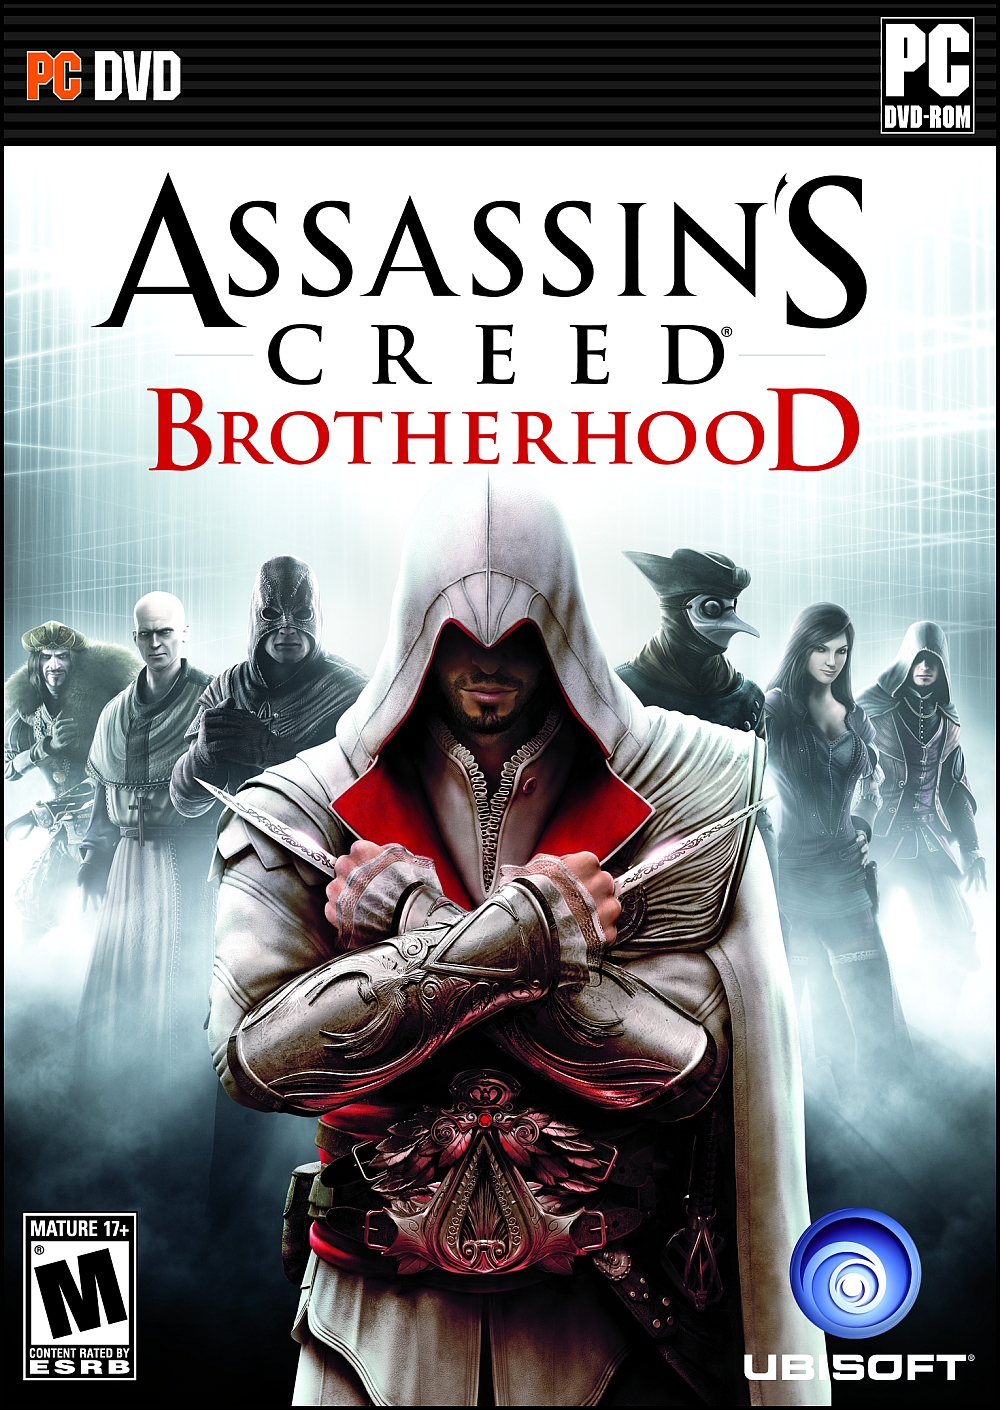 Assassins Creed (Highly compressed) | 16 mb